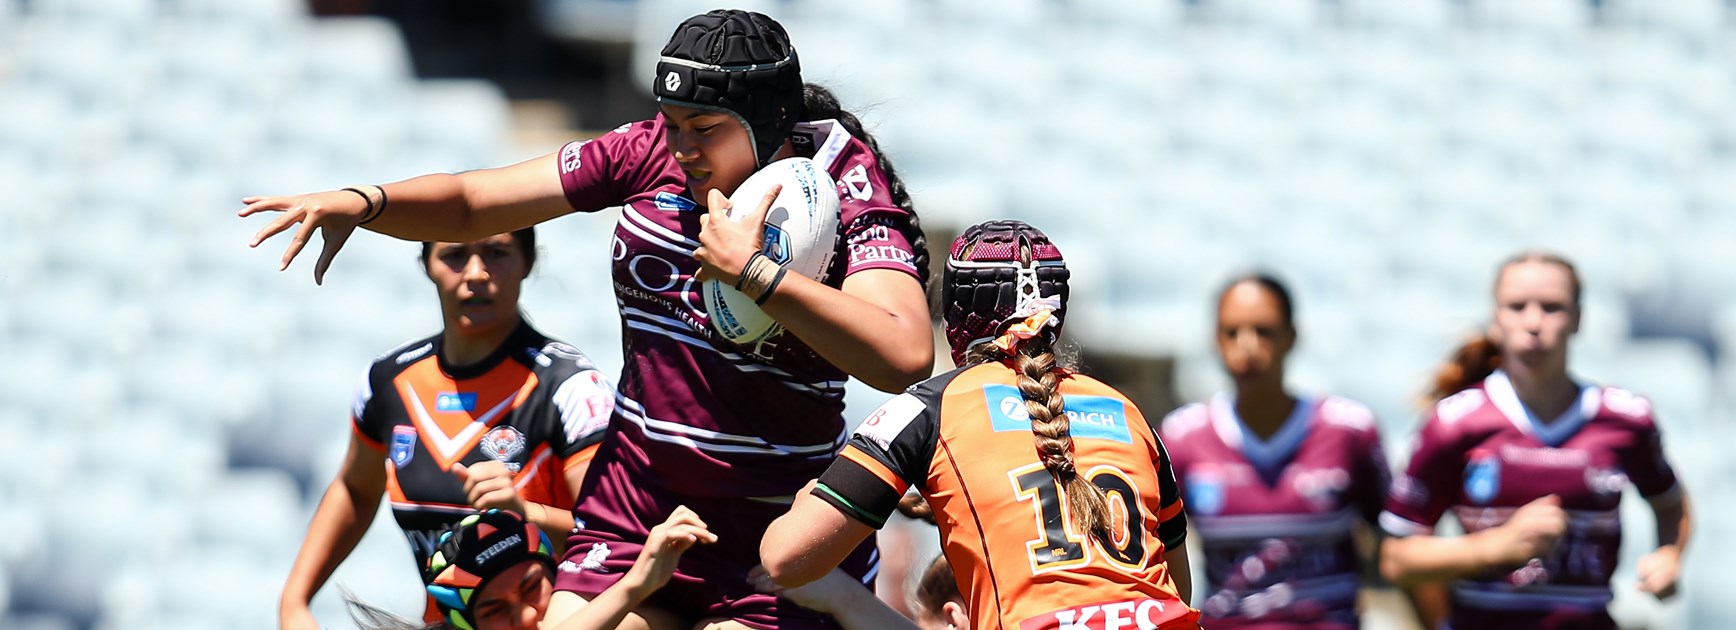 Back to business for Sea Eagles girls after famous win